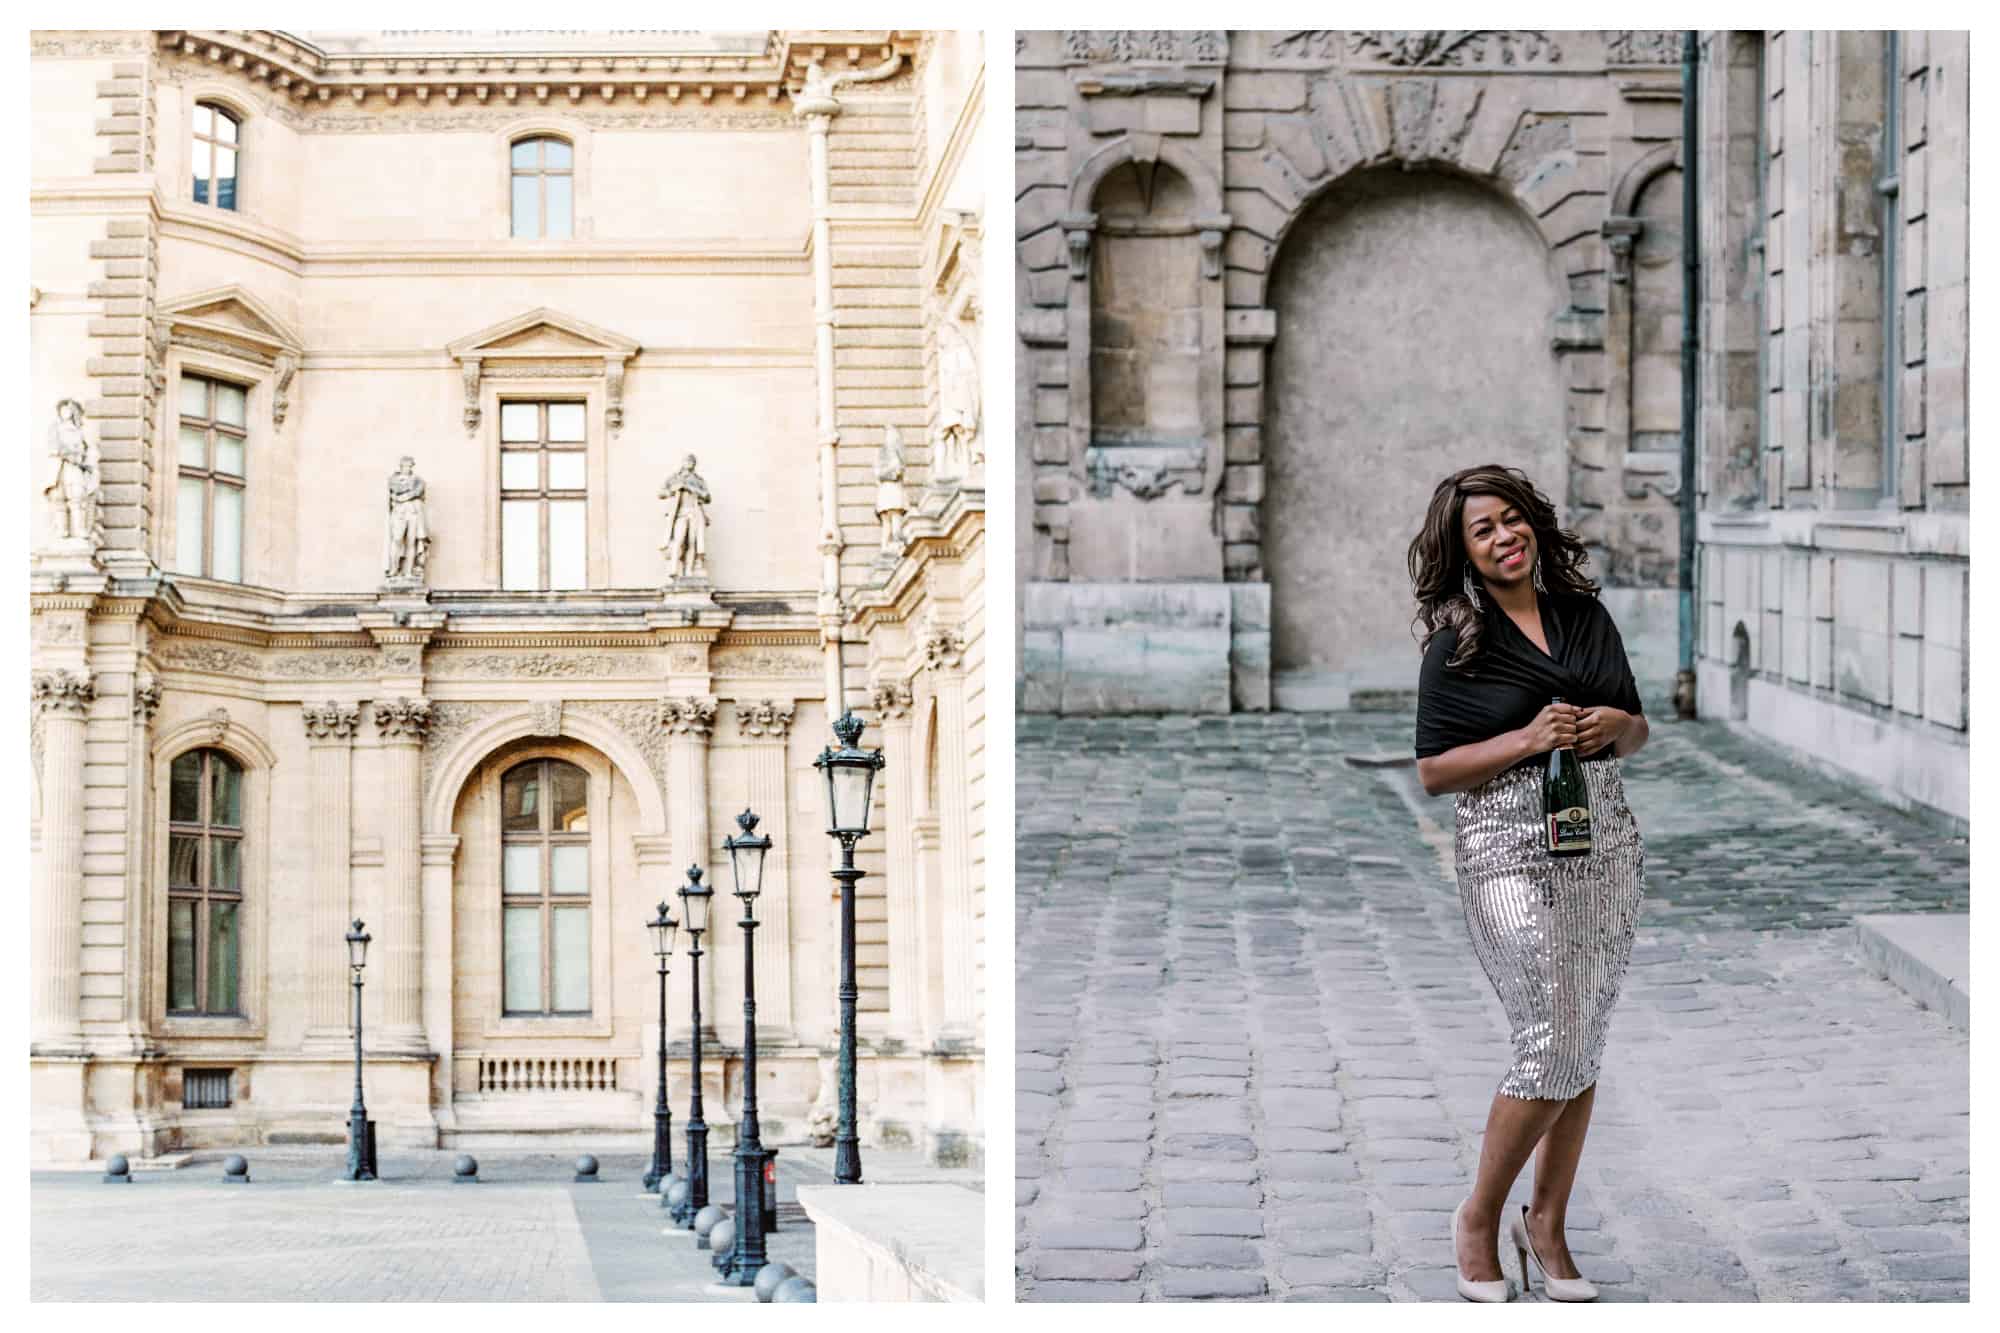 On left: A peaceful morning at the Louvre in an empty corner of the courtyard, the statues looking down onto the classic lampposts. On right: Tanisha Townsend of Girl Meets Glass, her wine tasting and tour company, smiles for the camera, holding a bottle of champagne.